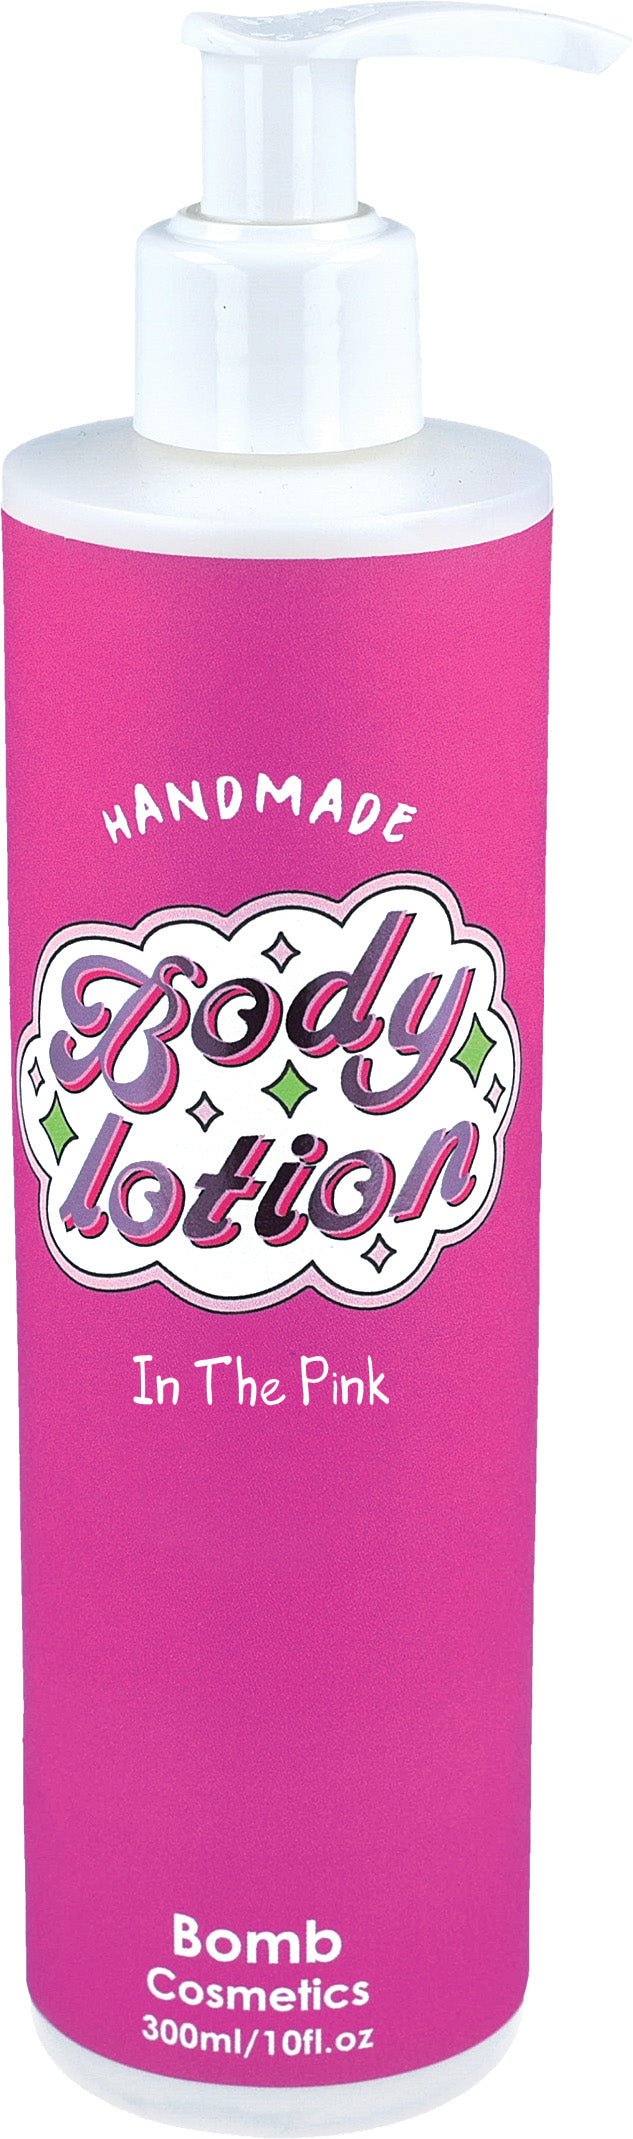 Bomb Cosmetics - In The Pink - Bodylotion - 300ml